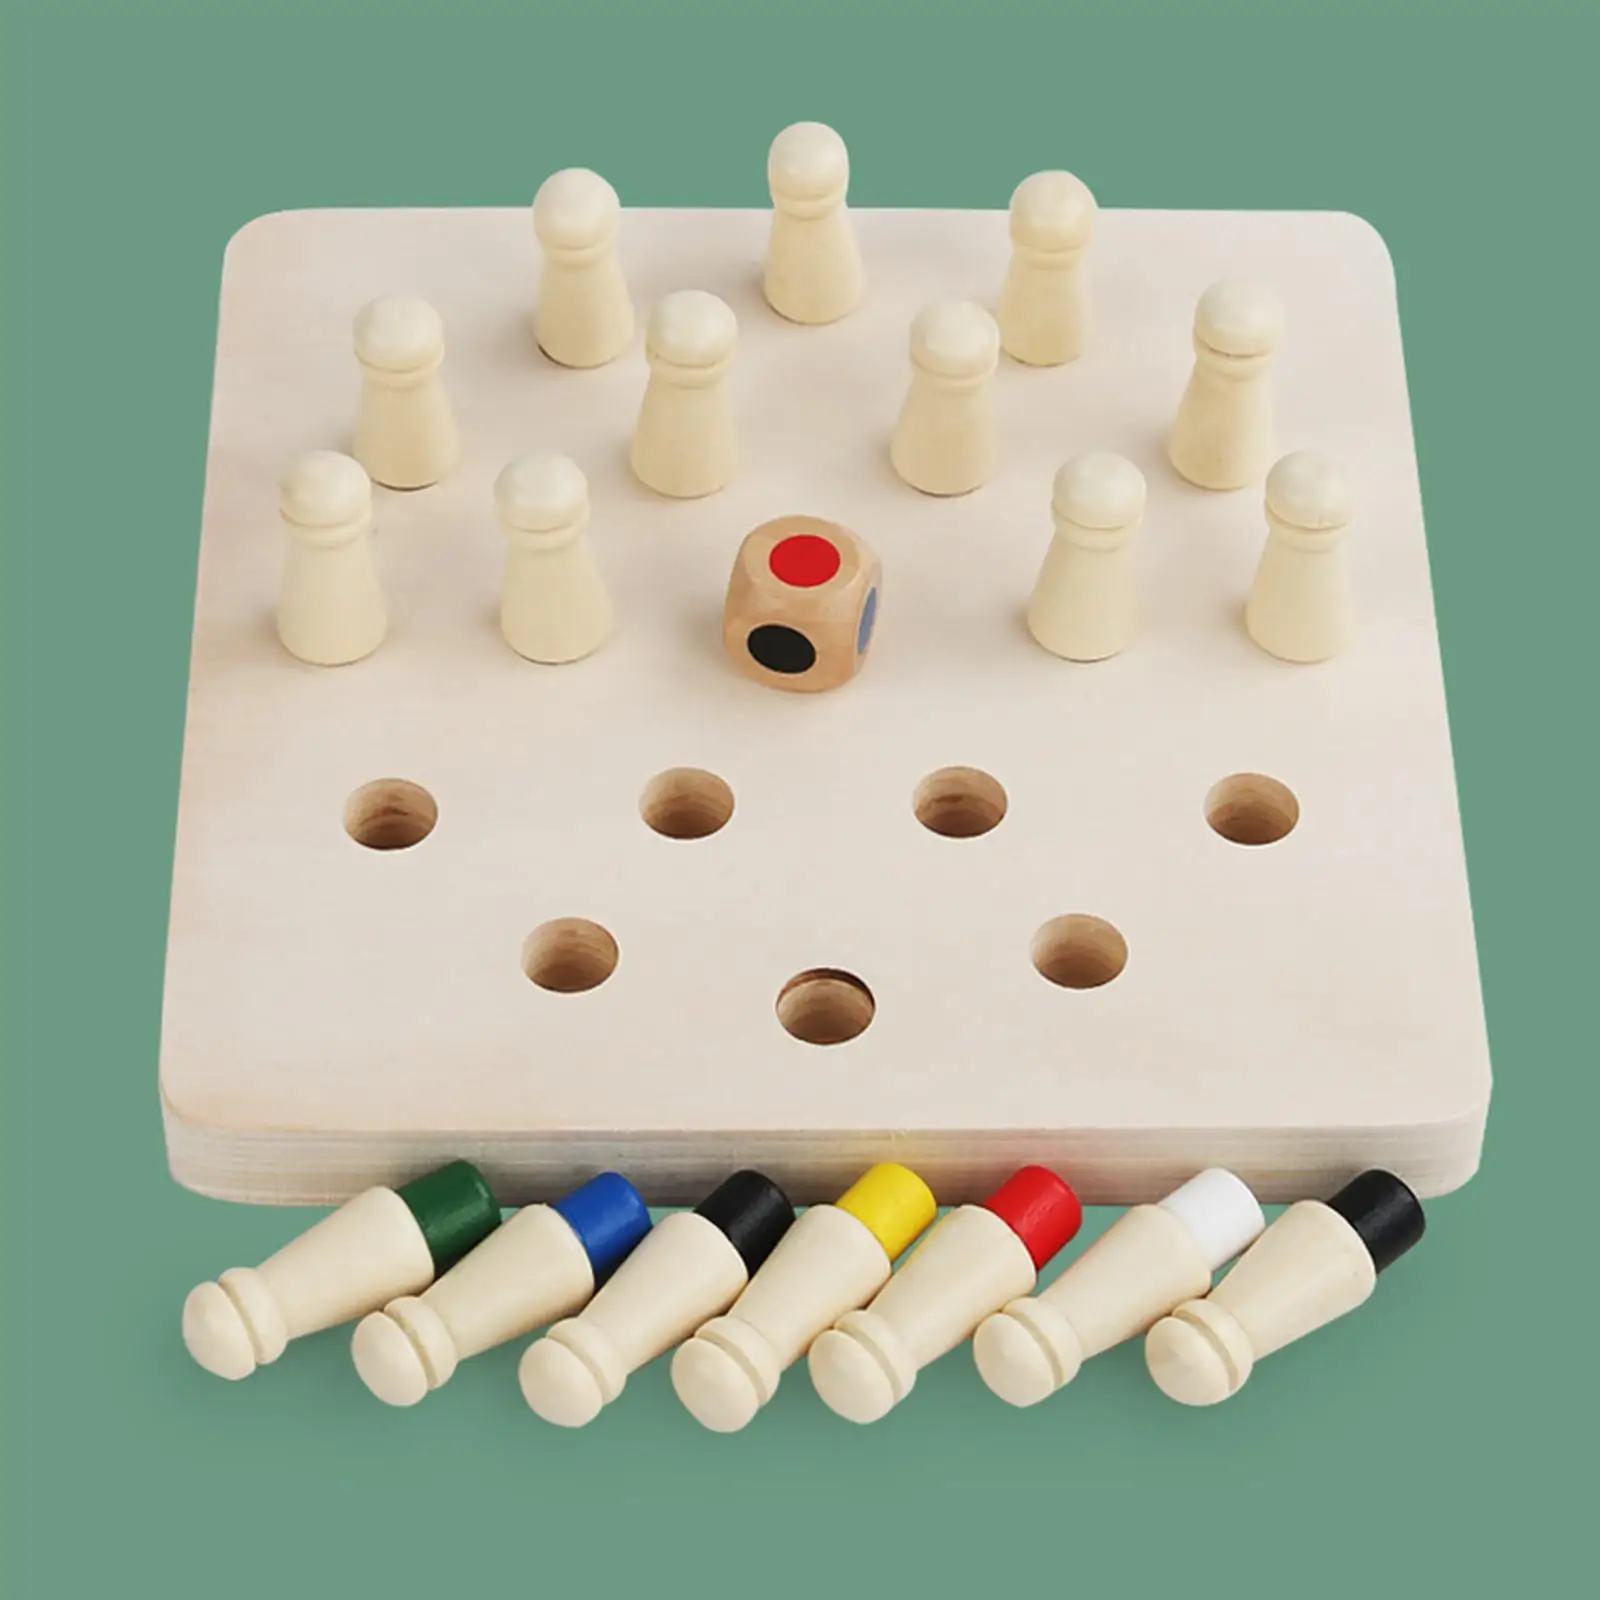 Montessori Preschool Learning Toy Educational Board Game Memory Matching Chess Board Game for Kids Boys Girls Adults Children